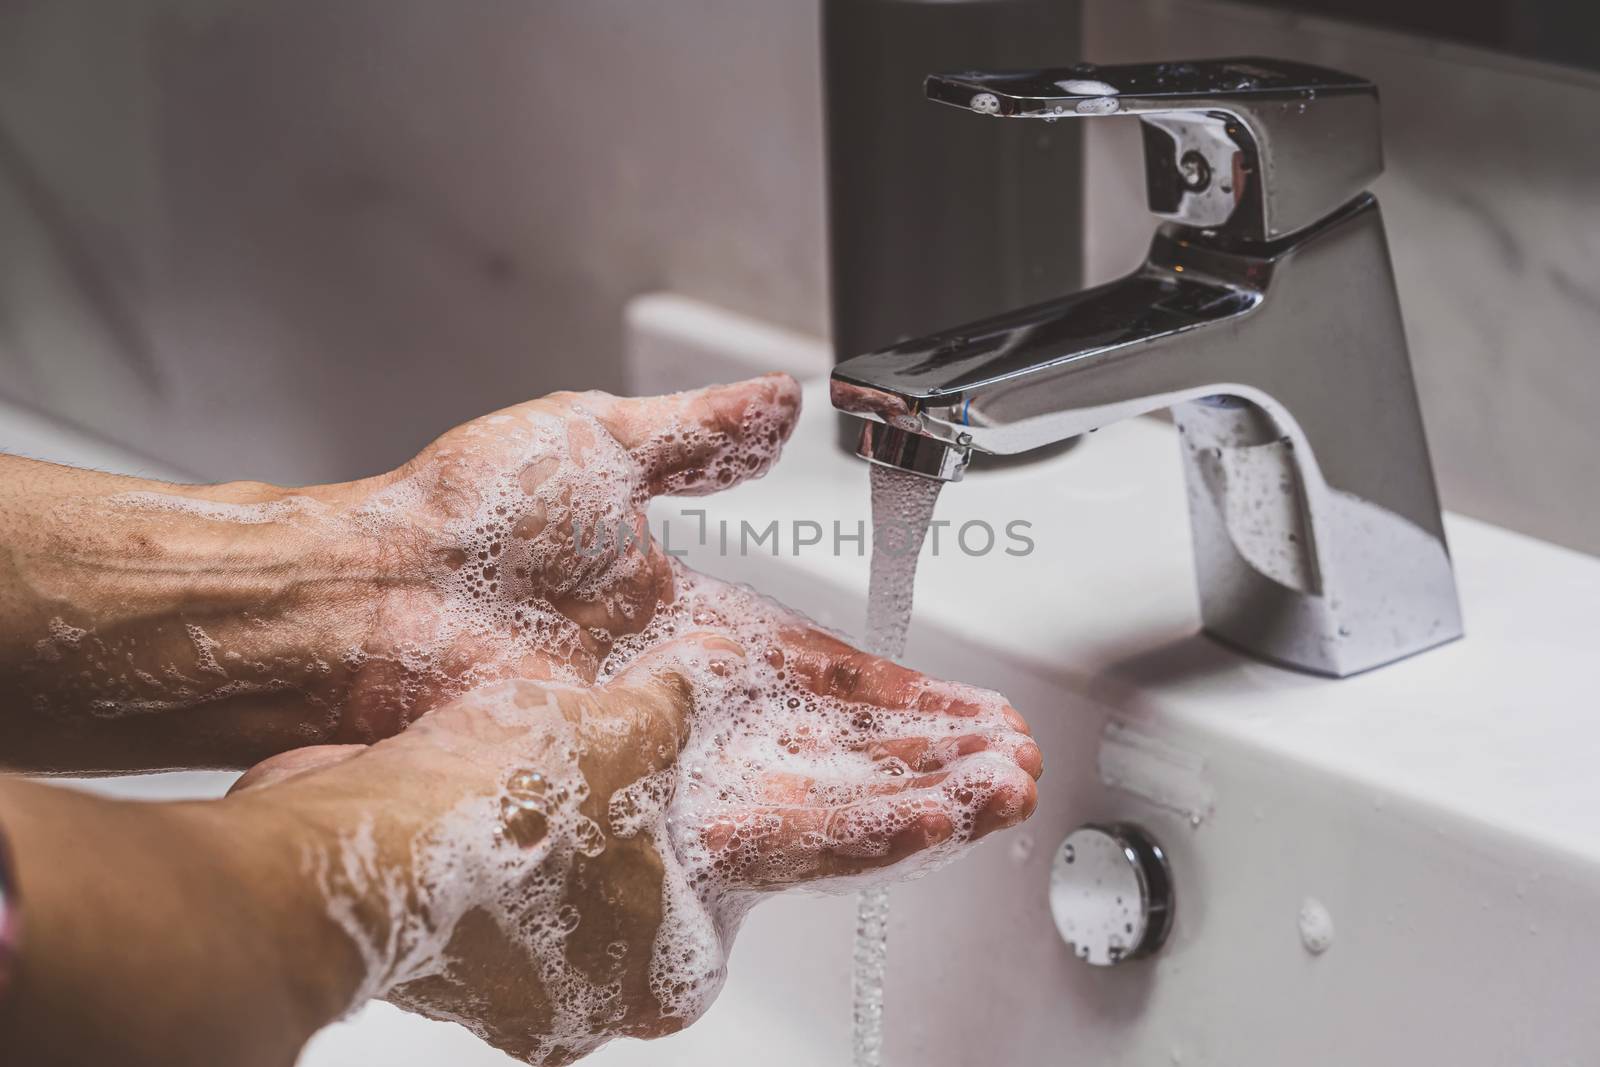 Closeup hands washing with Chrome faucet and soap for Coronavirus pandemic prevention in bathroom, self responsibility cleaning, hand hygiene corona virus protection concept